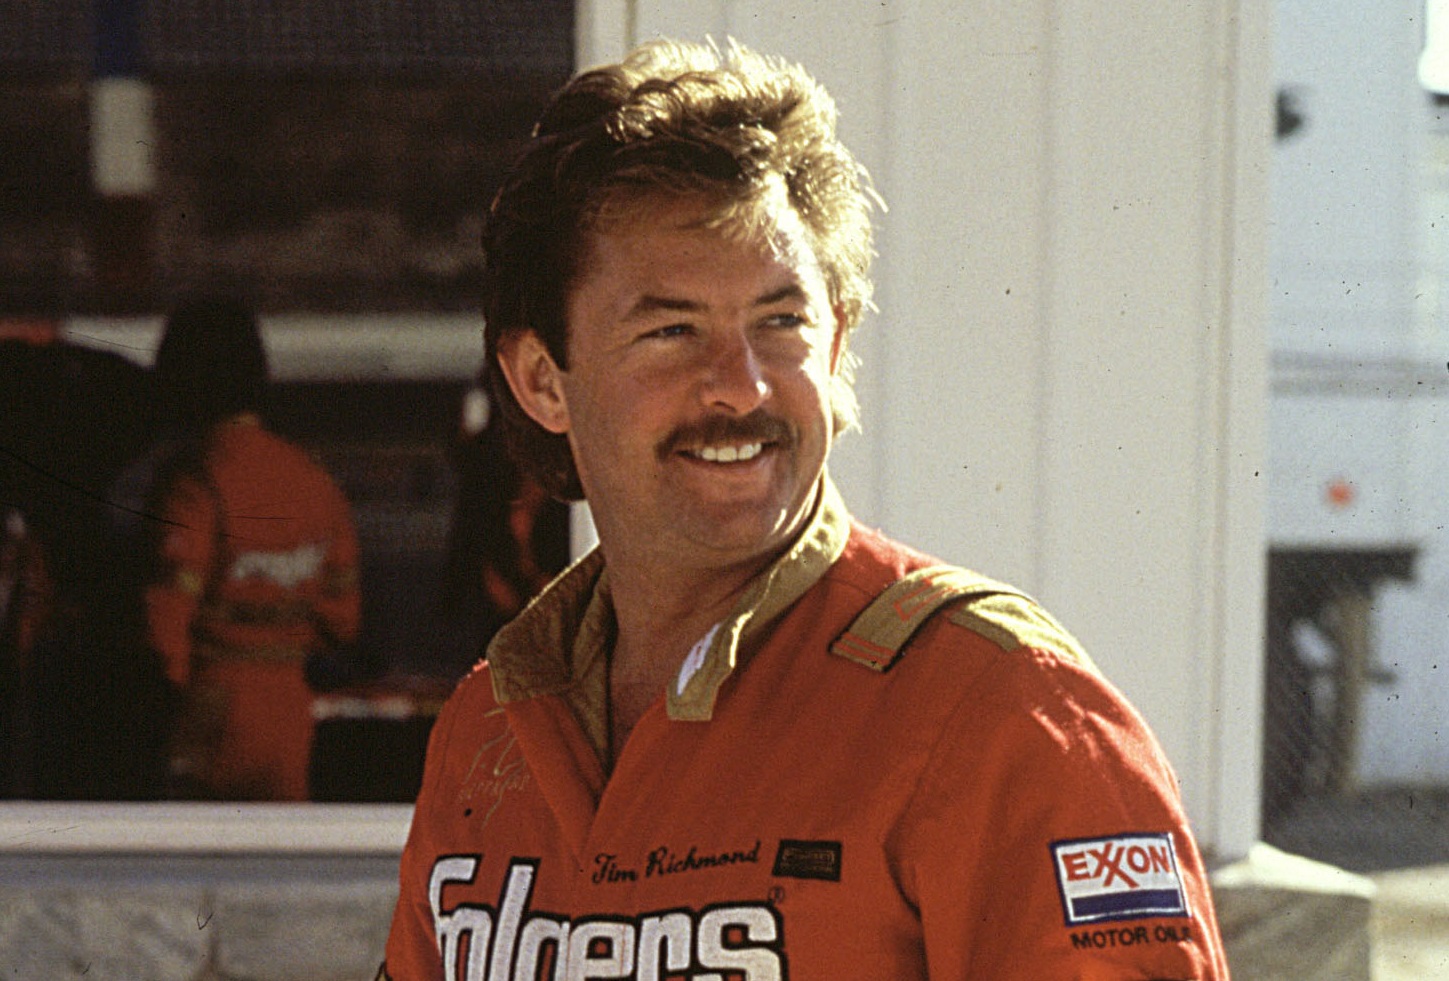 Tim Richmond finished third in NASCAR Cup points on the strength of seven wins during the 1986 season.